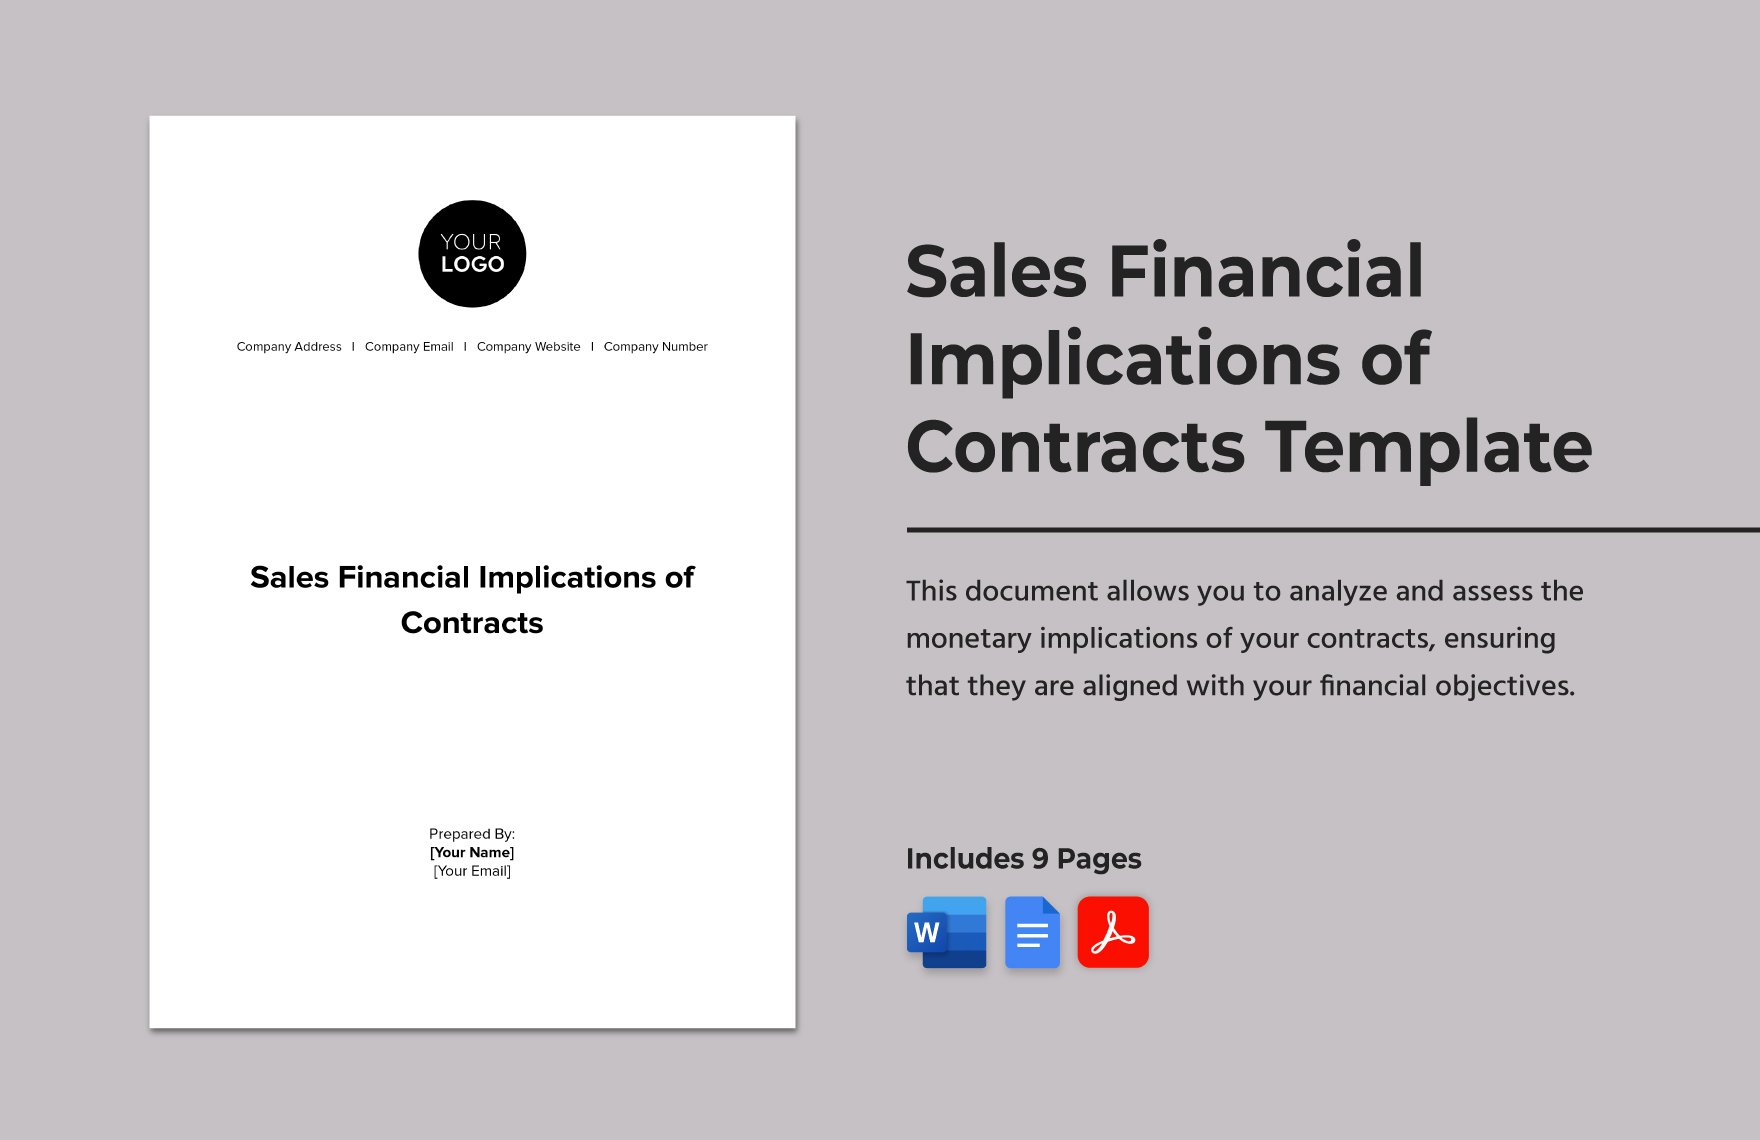 Sales Financial Implications of Contracts Template